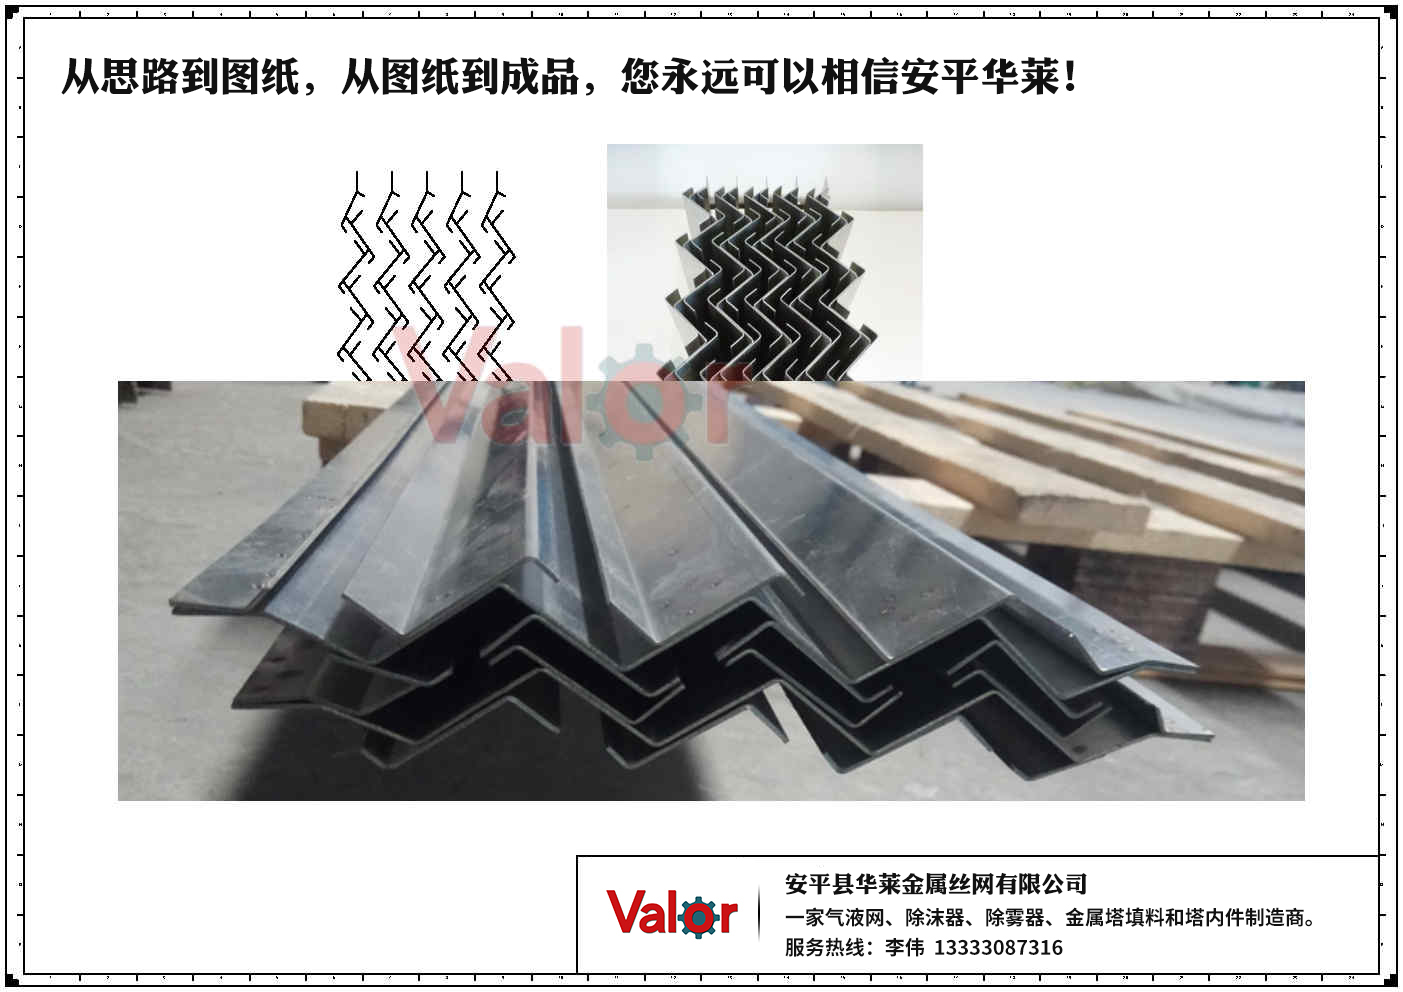 high efficiency vane pack demister, long time service without maintaining